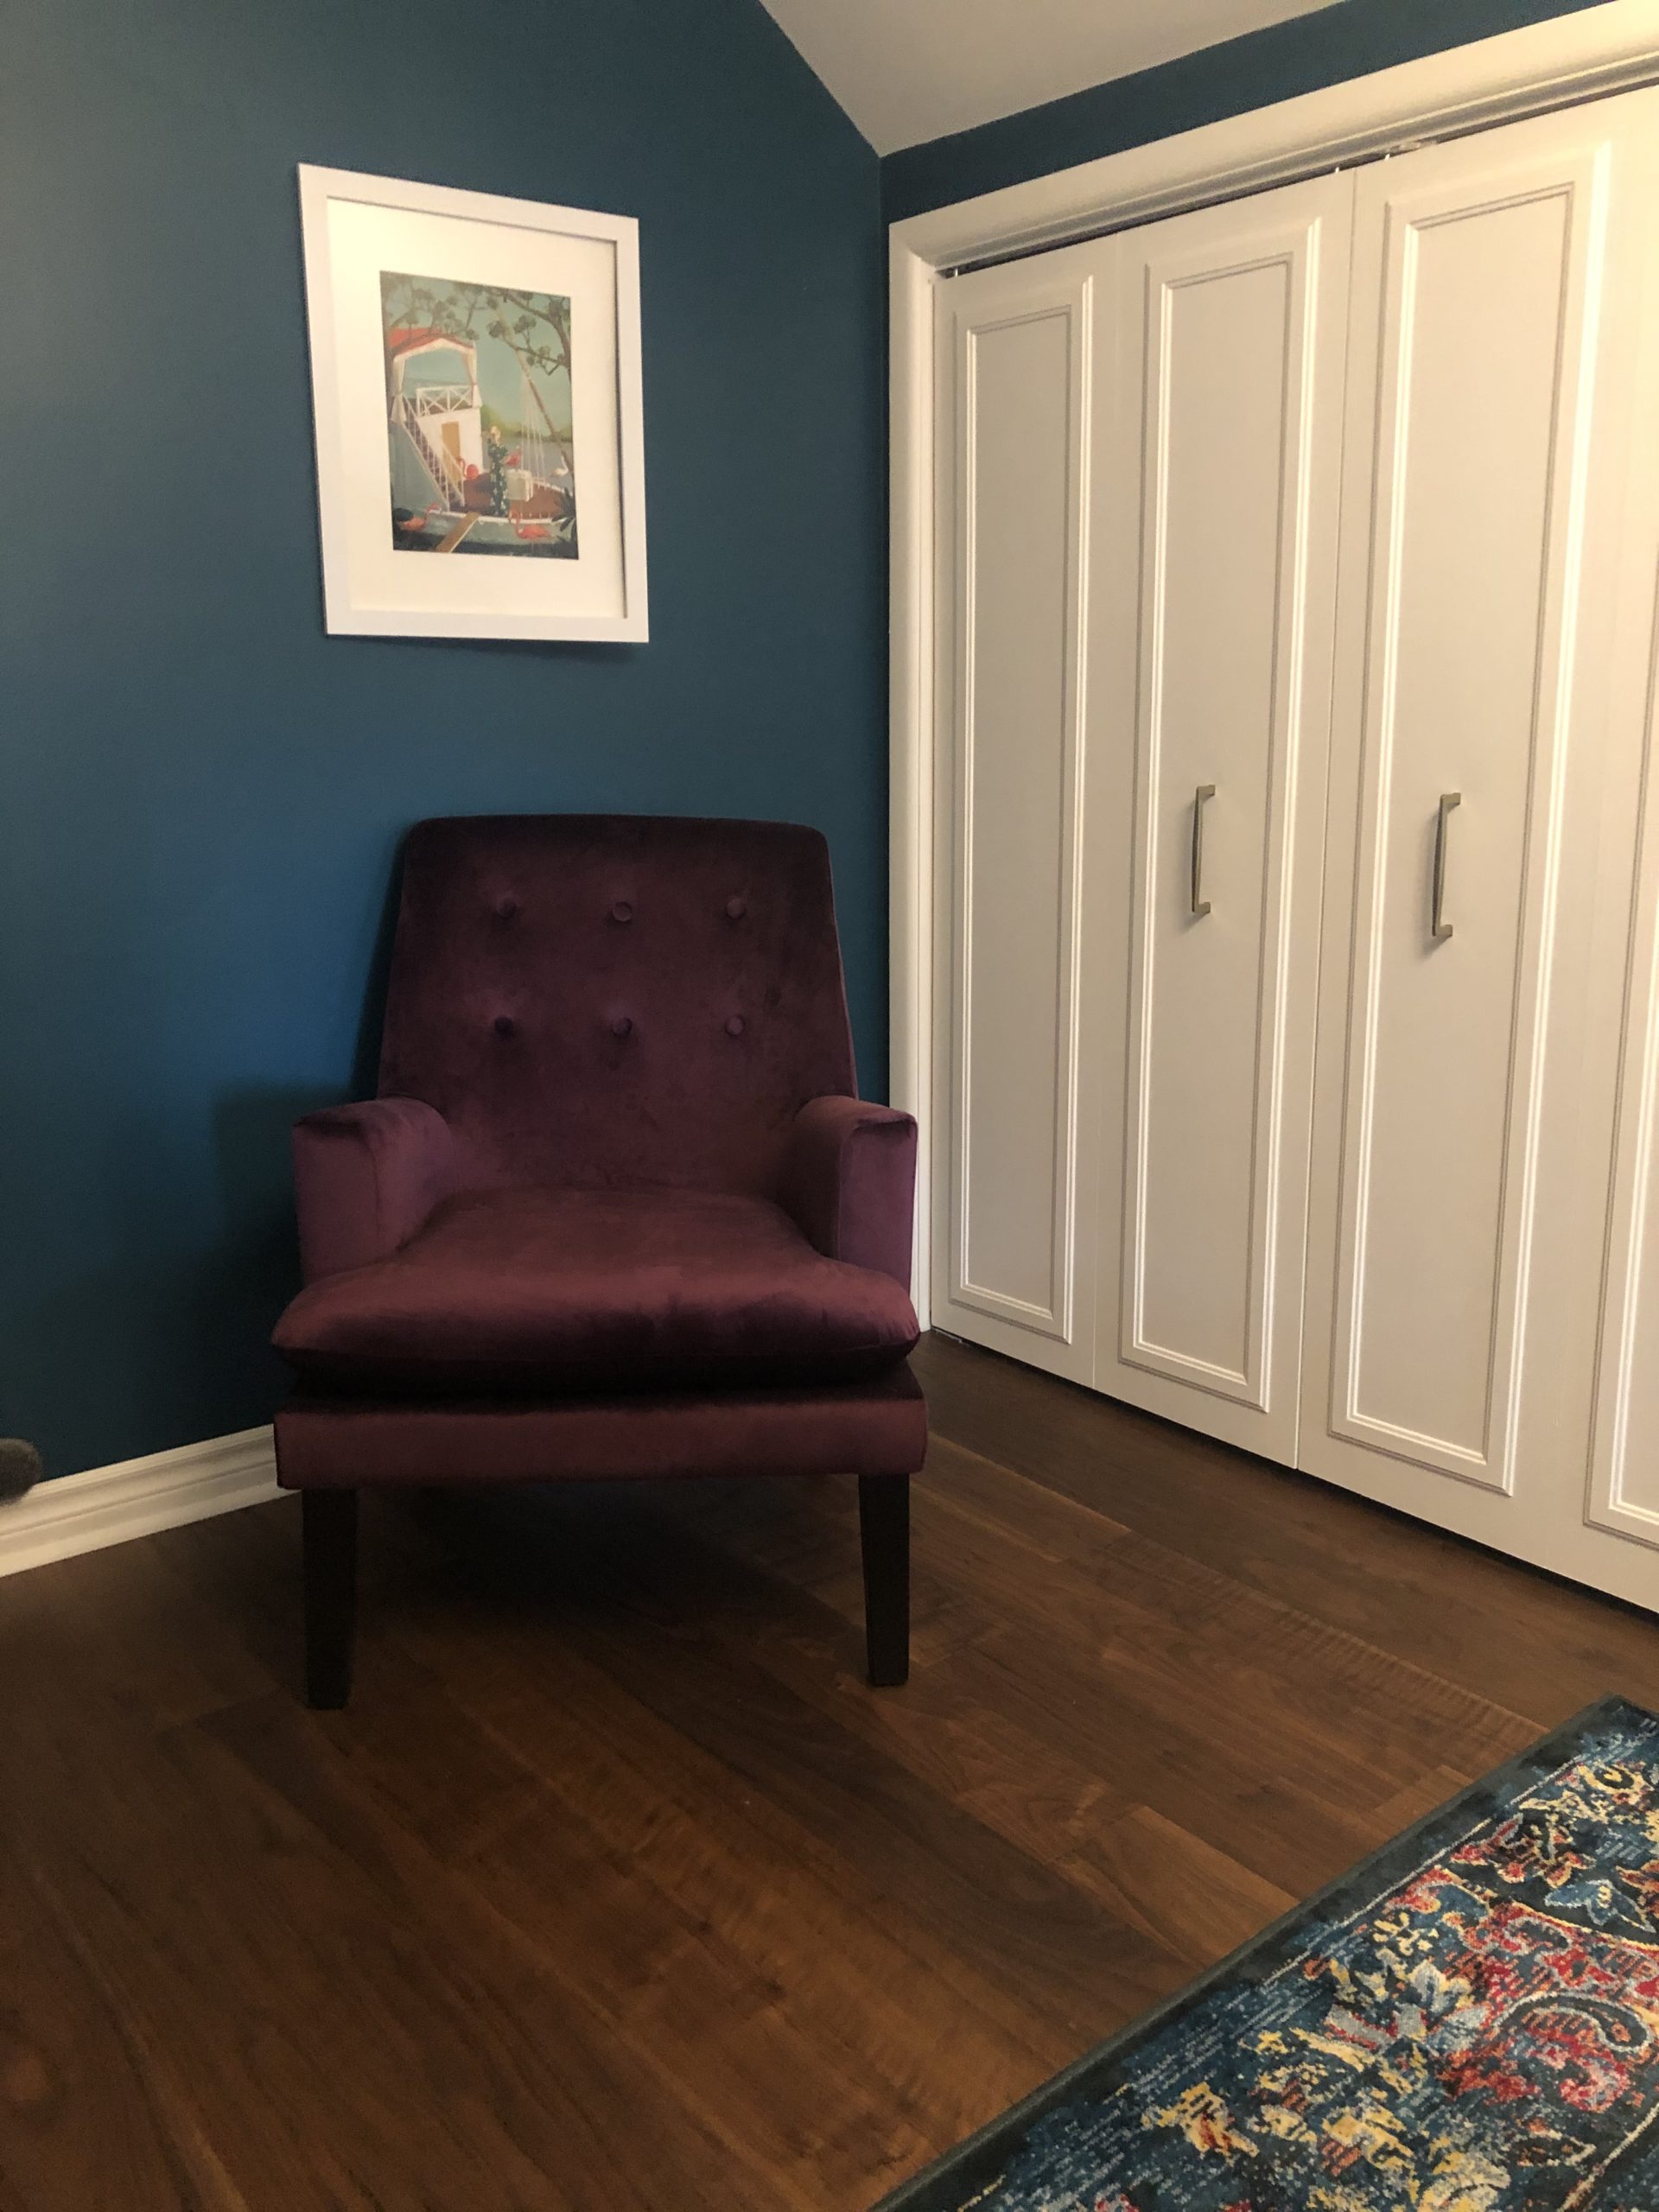 closed in closet with sitting chair and artwork